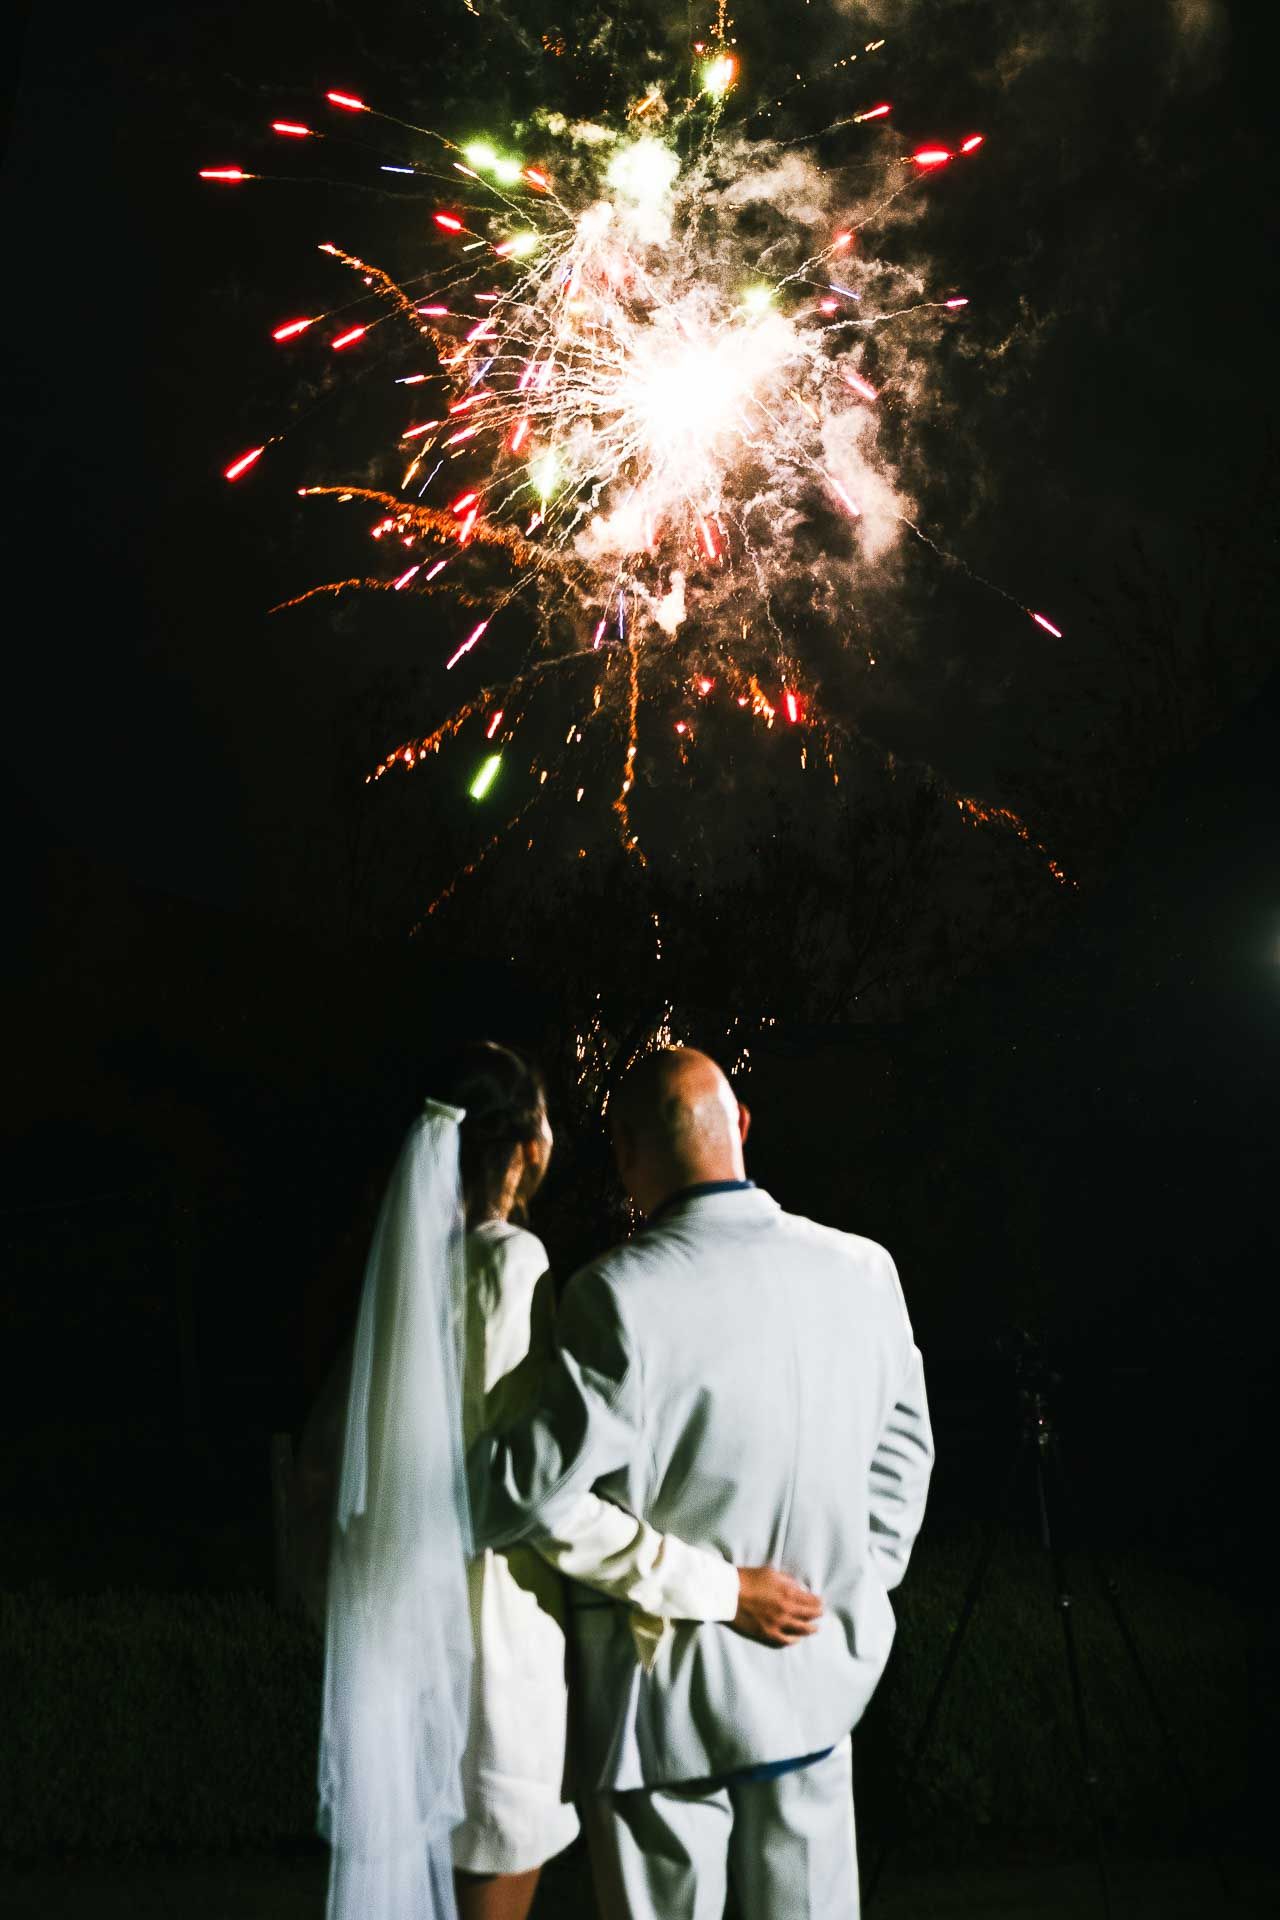 Adrian and Nadia watching fireworks by Star Fireworks UK that concluded their wedding celebrations. Orange and green fireworks light up the sky whilst Adrian and Nadia look up with their backs to the camera. Mark Cairns - a mind reader and magician entertainer for weddings and events - wowing guests with his tricks during Adrian and Nadia's wedding reception. Photo by Des Dubber Photography, videography by Veiled Productions